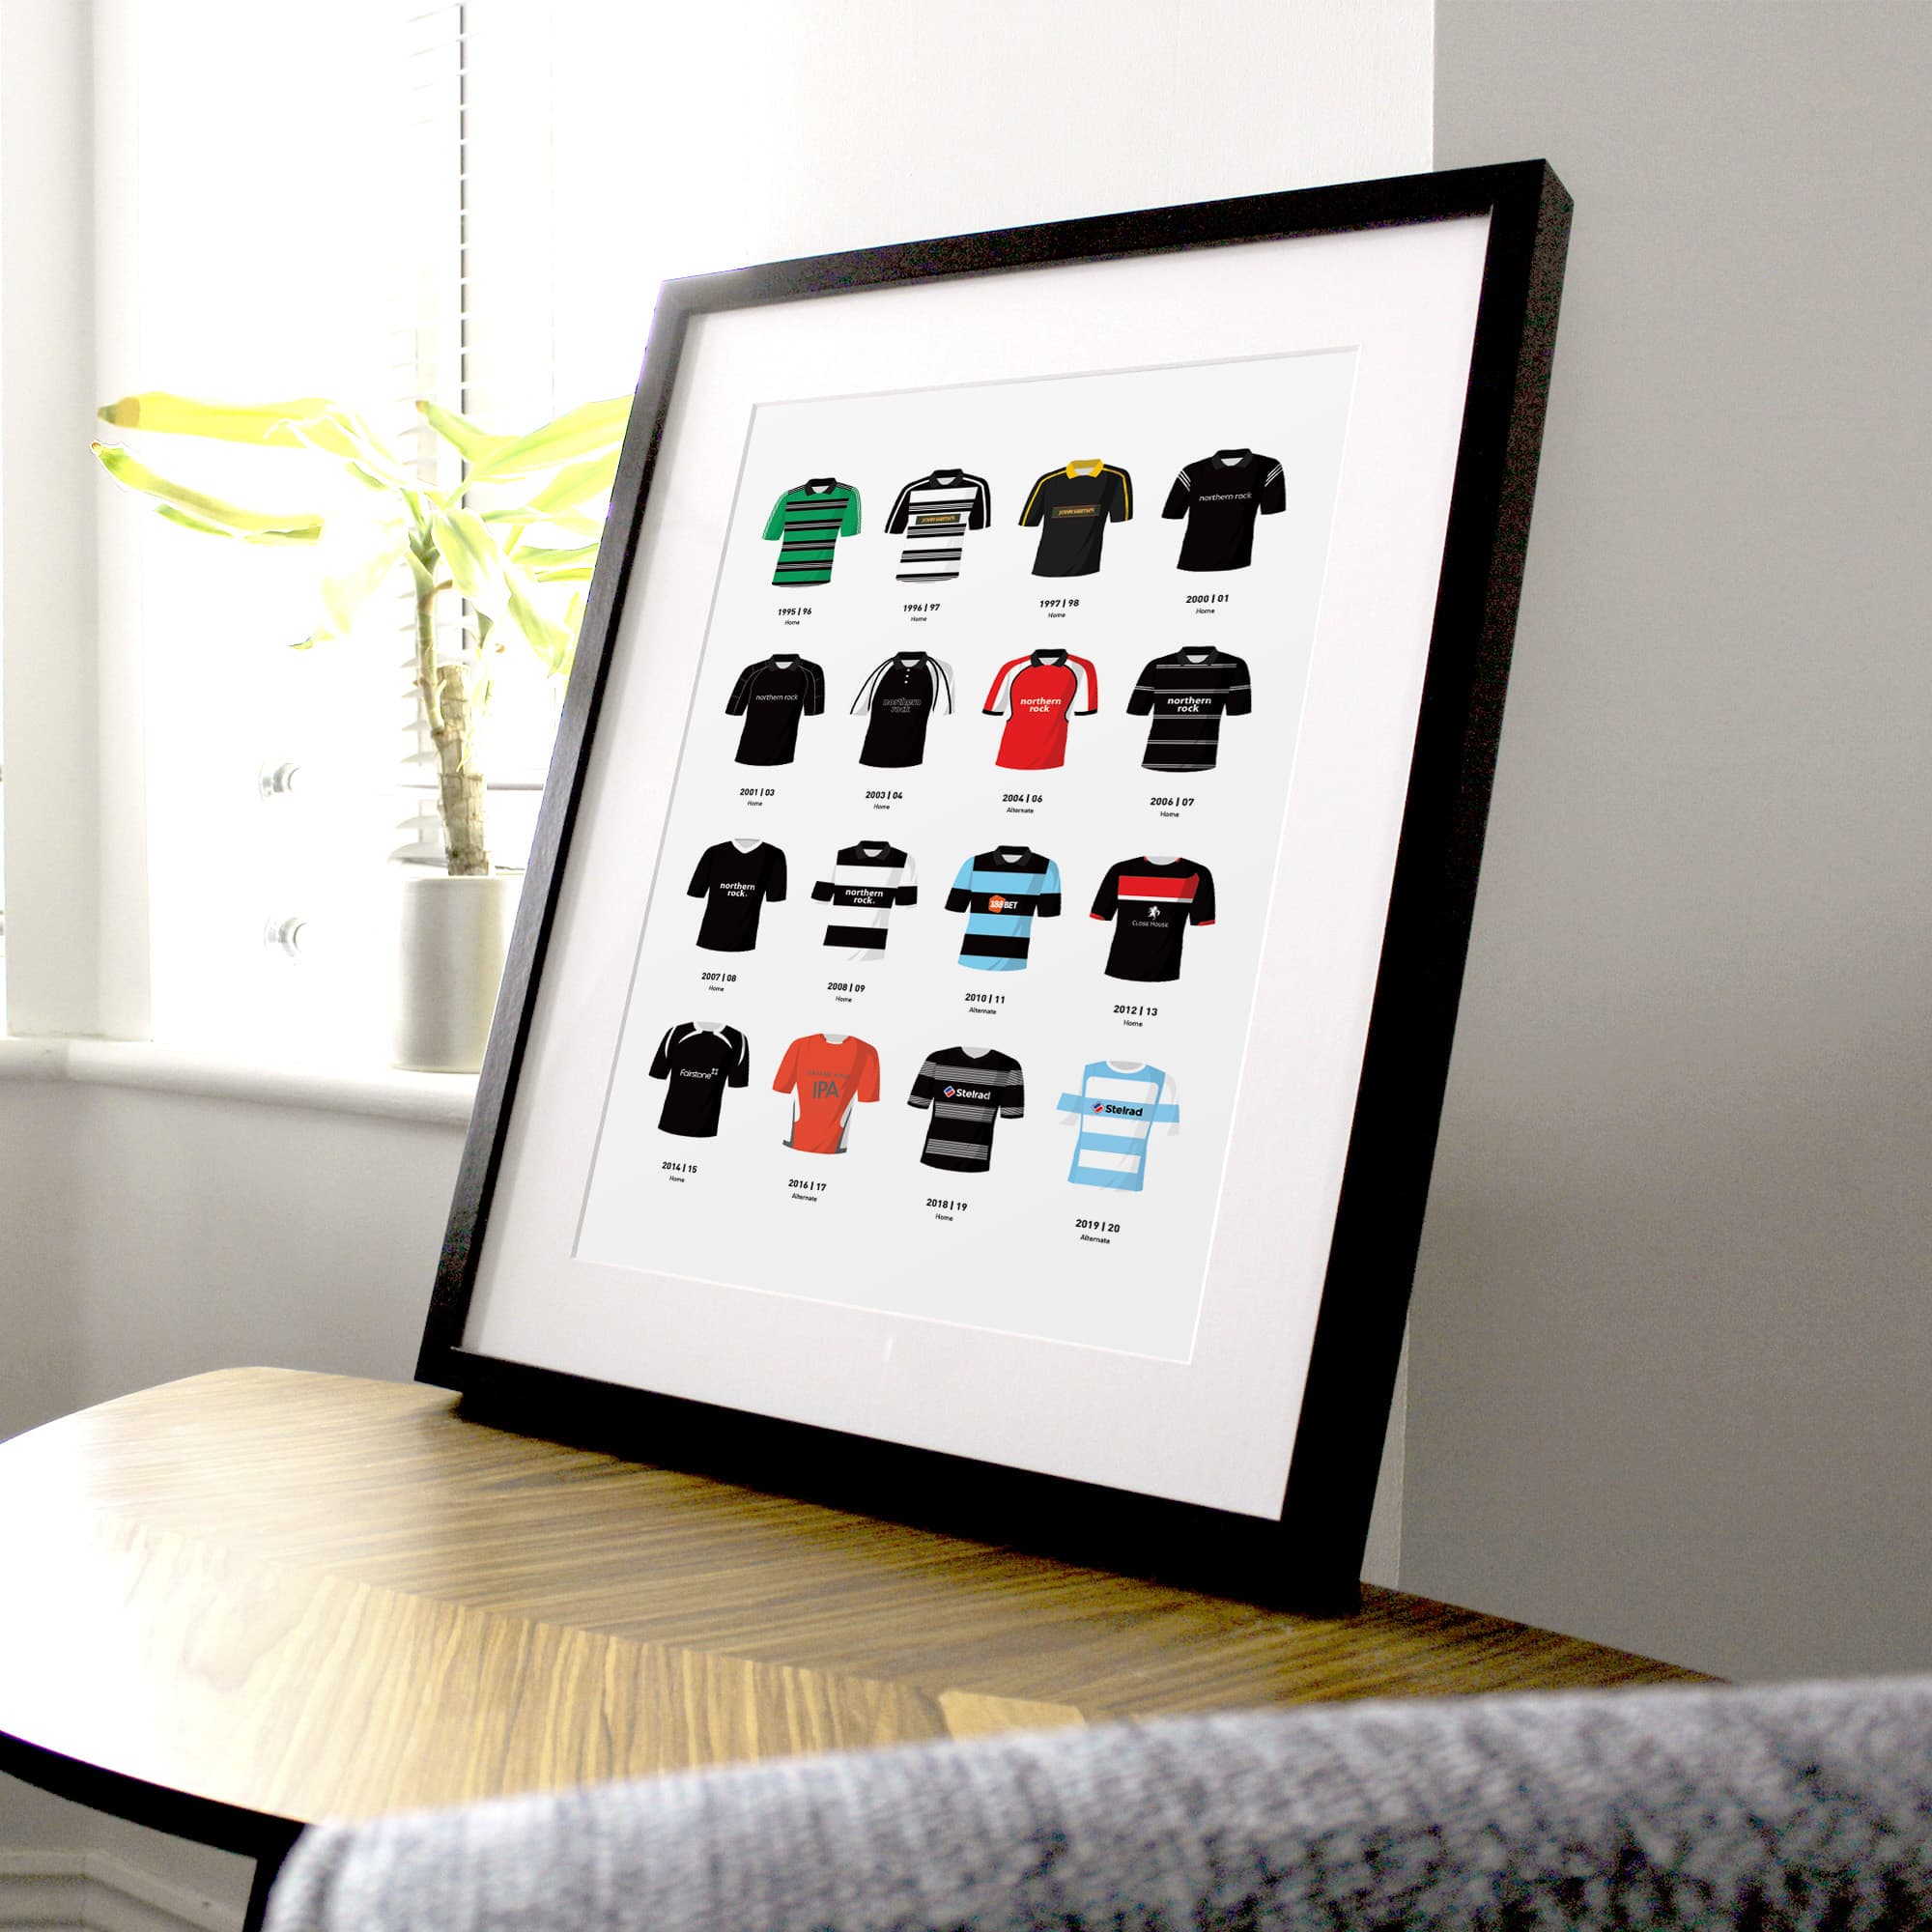 Newcastle Classic Kits Rugby Union Team Print